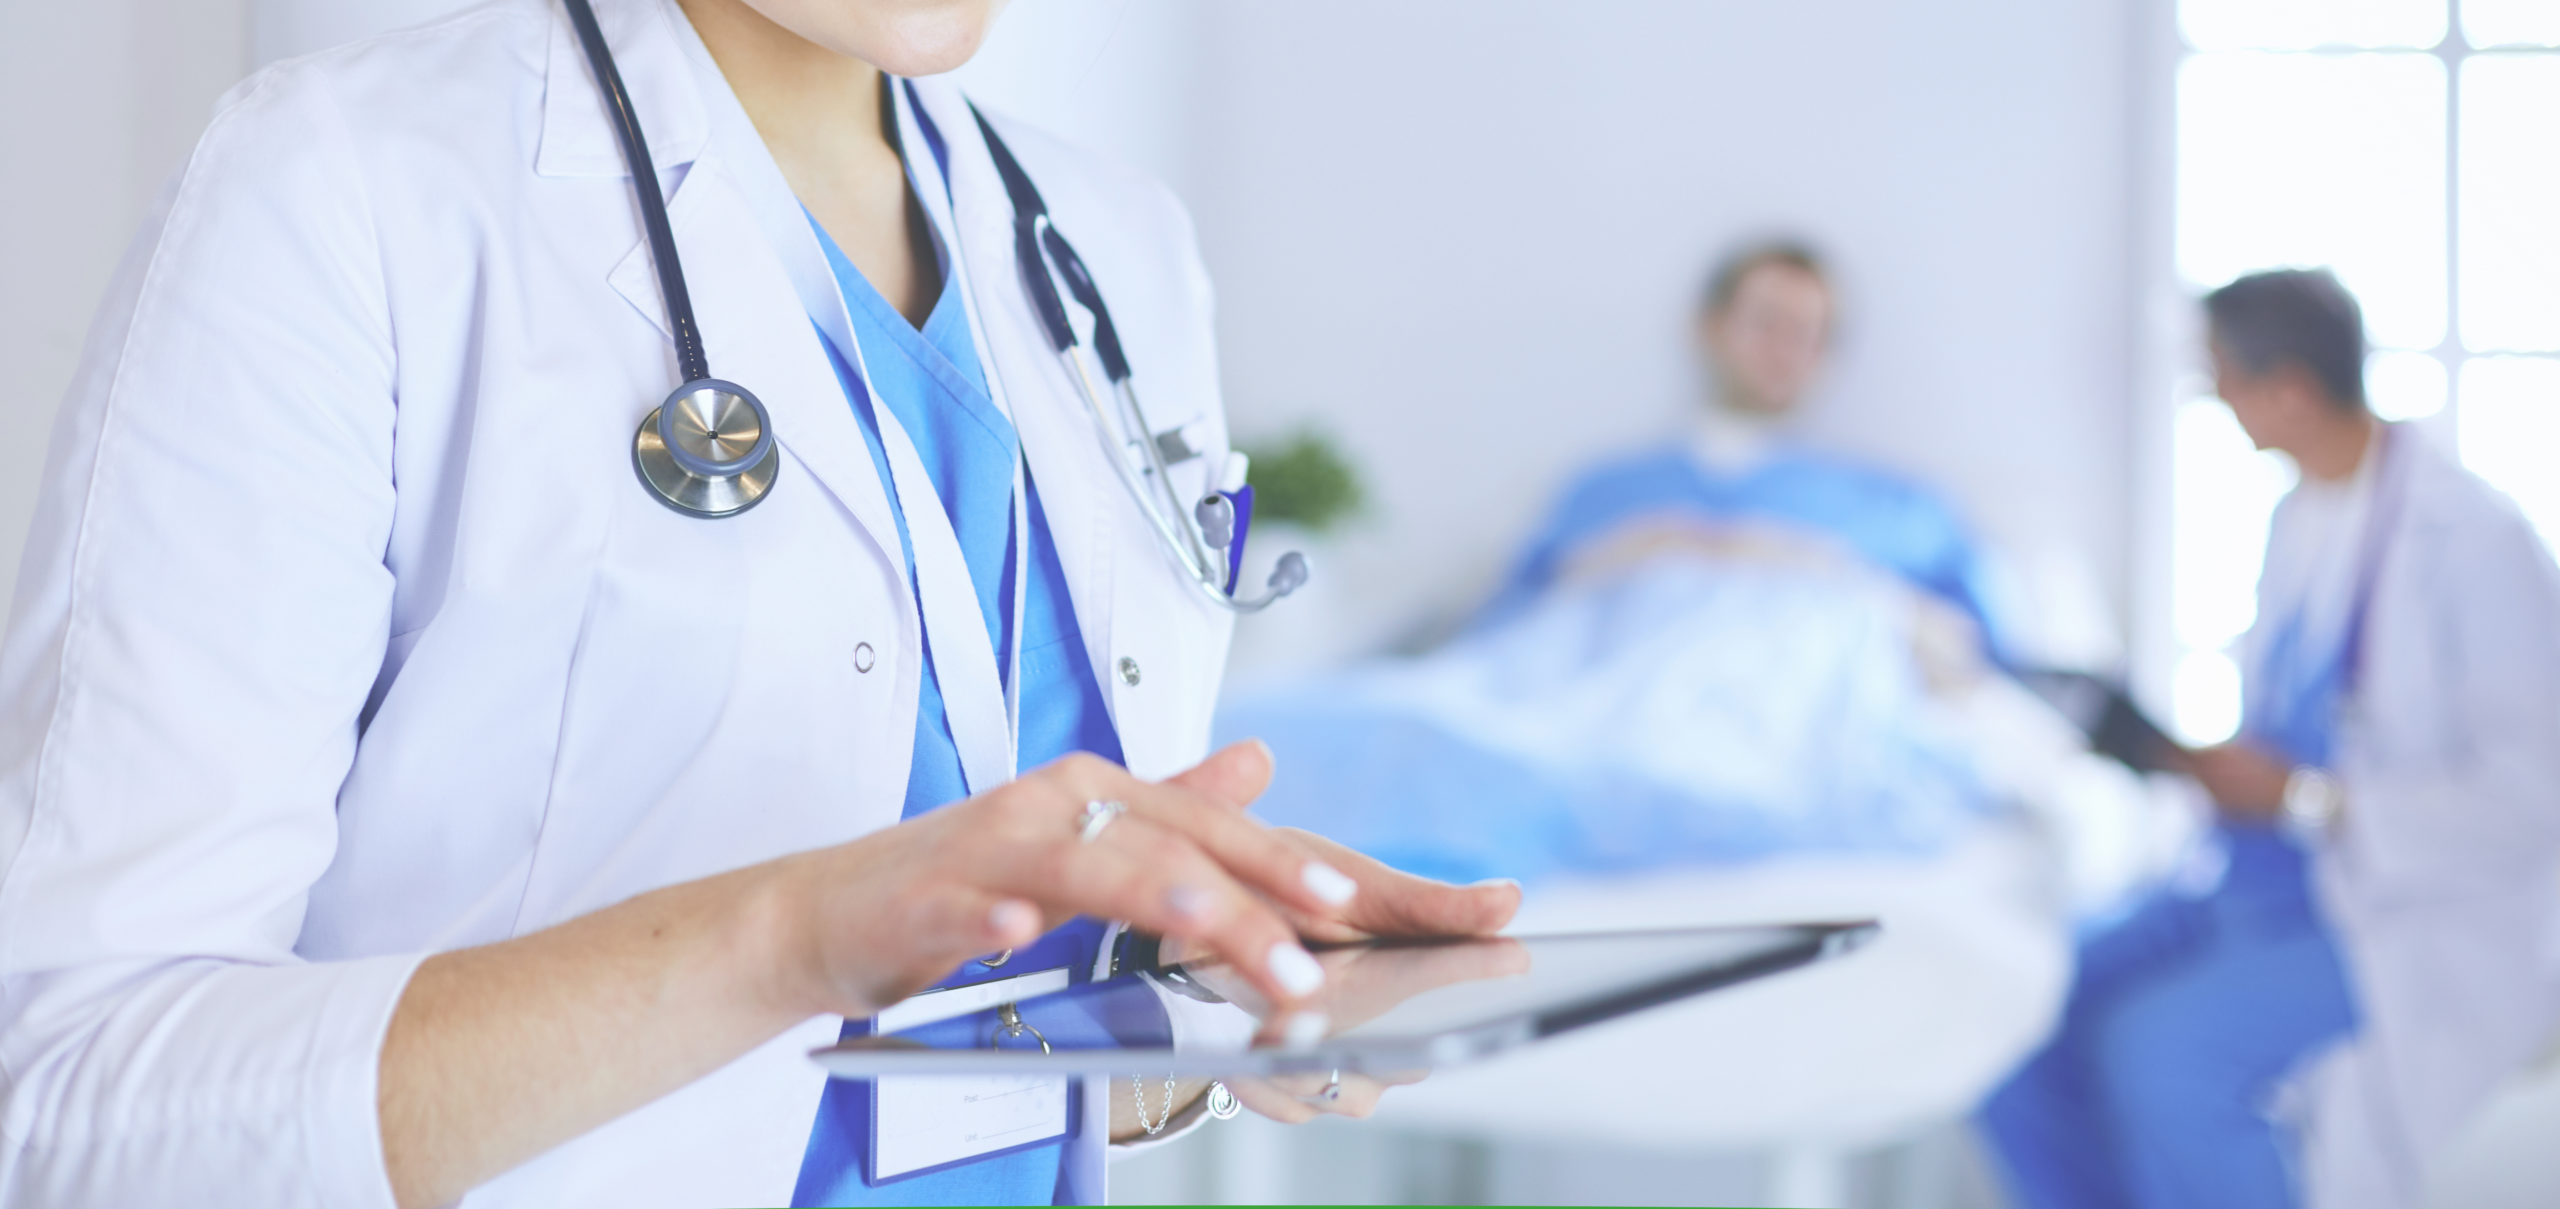 Trends in Healthcare Technology Blog Feature Image: A doctor checks patient notes on a tablet as other healthcare providers work with patients in the background